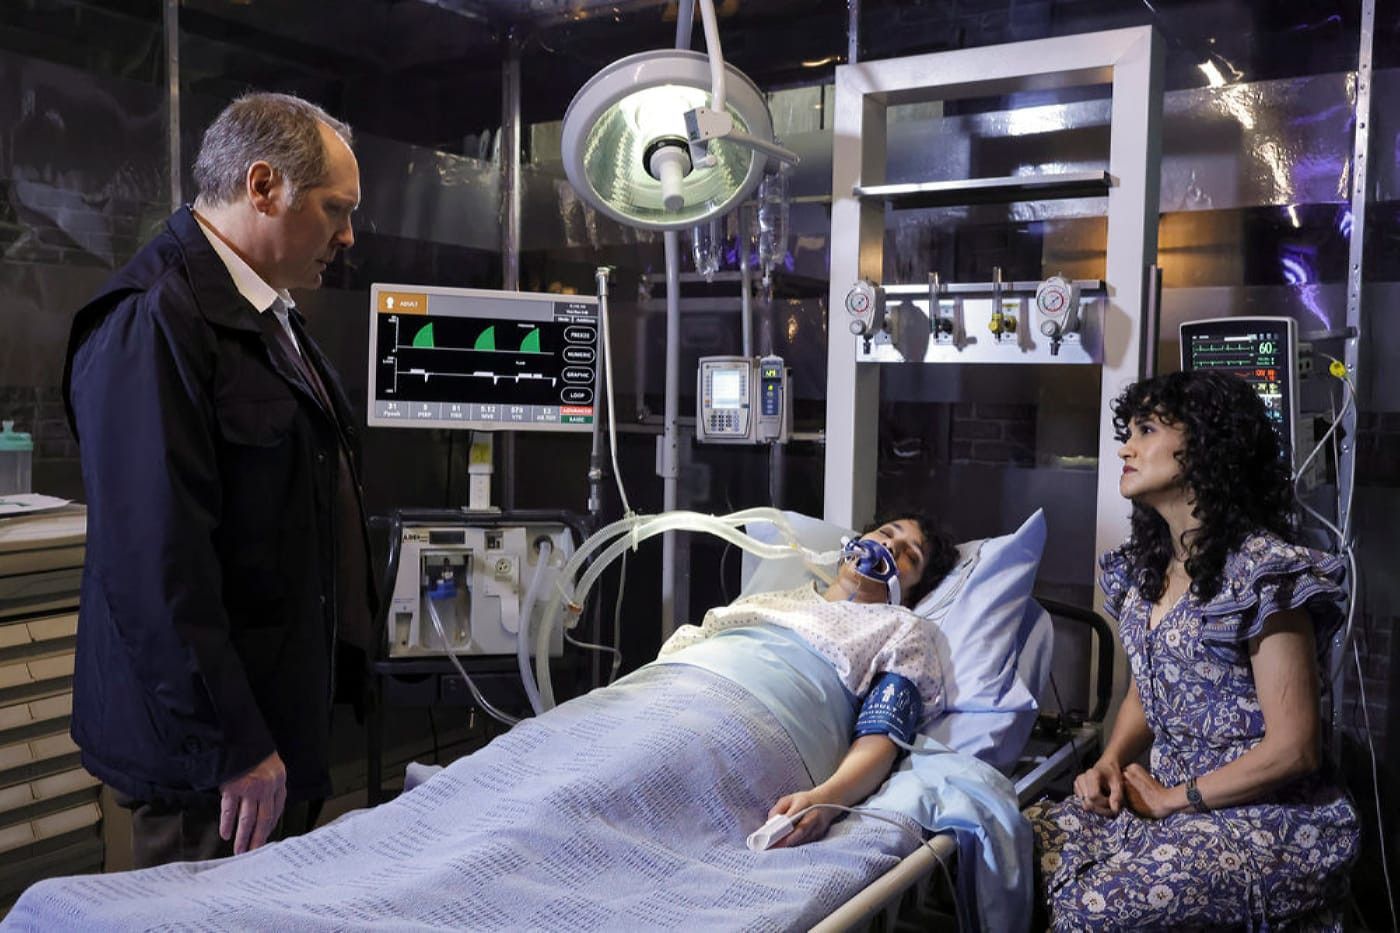 THE BLACKLIST Season 9 Epiosde 21 James Spader as Red , Weecha and her sister in the hospital